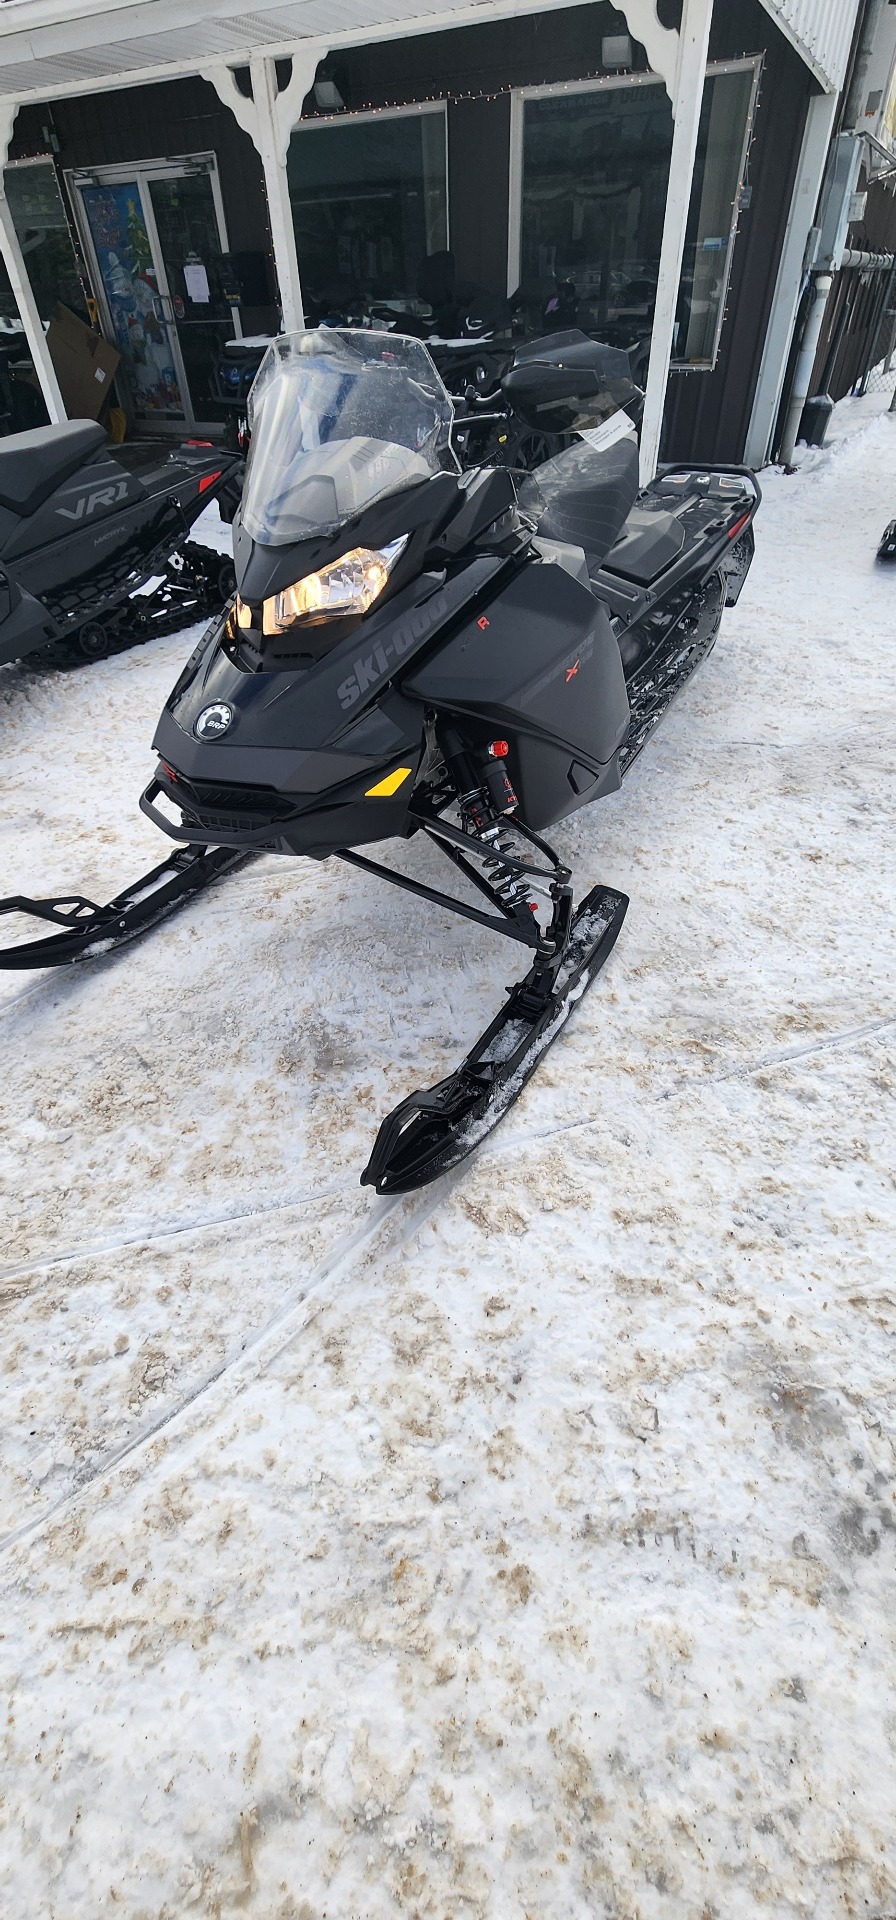 2023 Ski-Doo RENEGADE X-RS 600 COMPETITION in Phoenix, New York - Photo 1